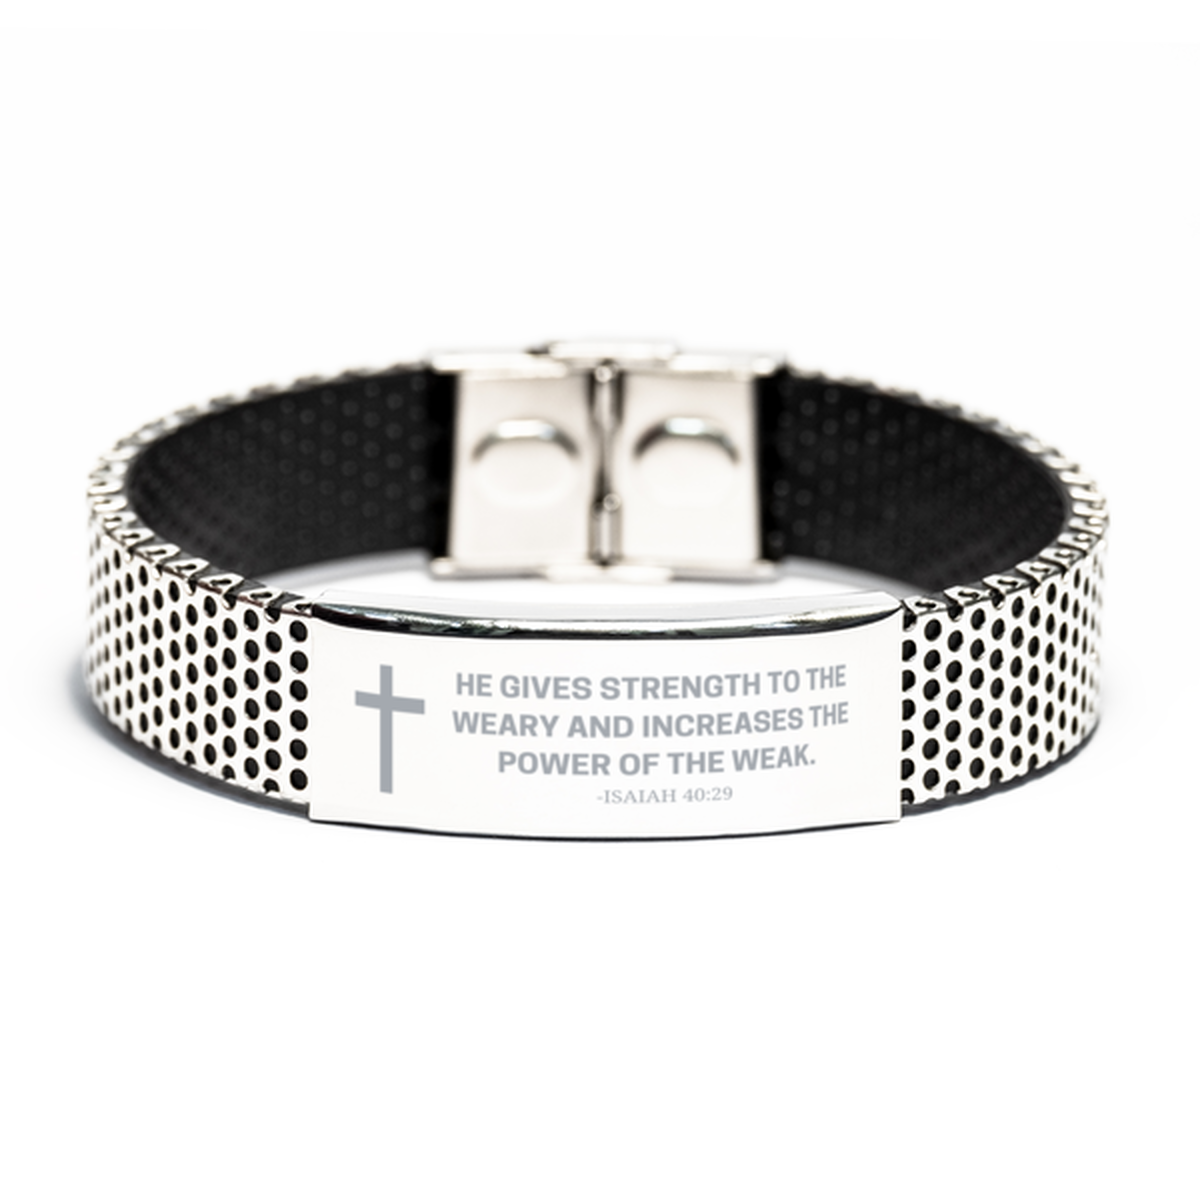 Baptism Gifts For Teenage Boys Girls, Christian Bible Verse Stainless Steel Bracelet, He gives strength to the weary, Catholic Confirmation Gifts for Son, Godson, Grandson, Nephew